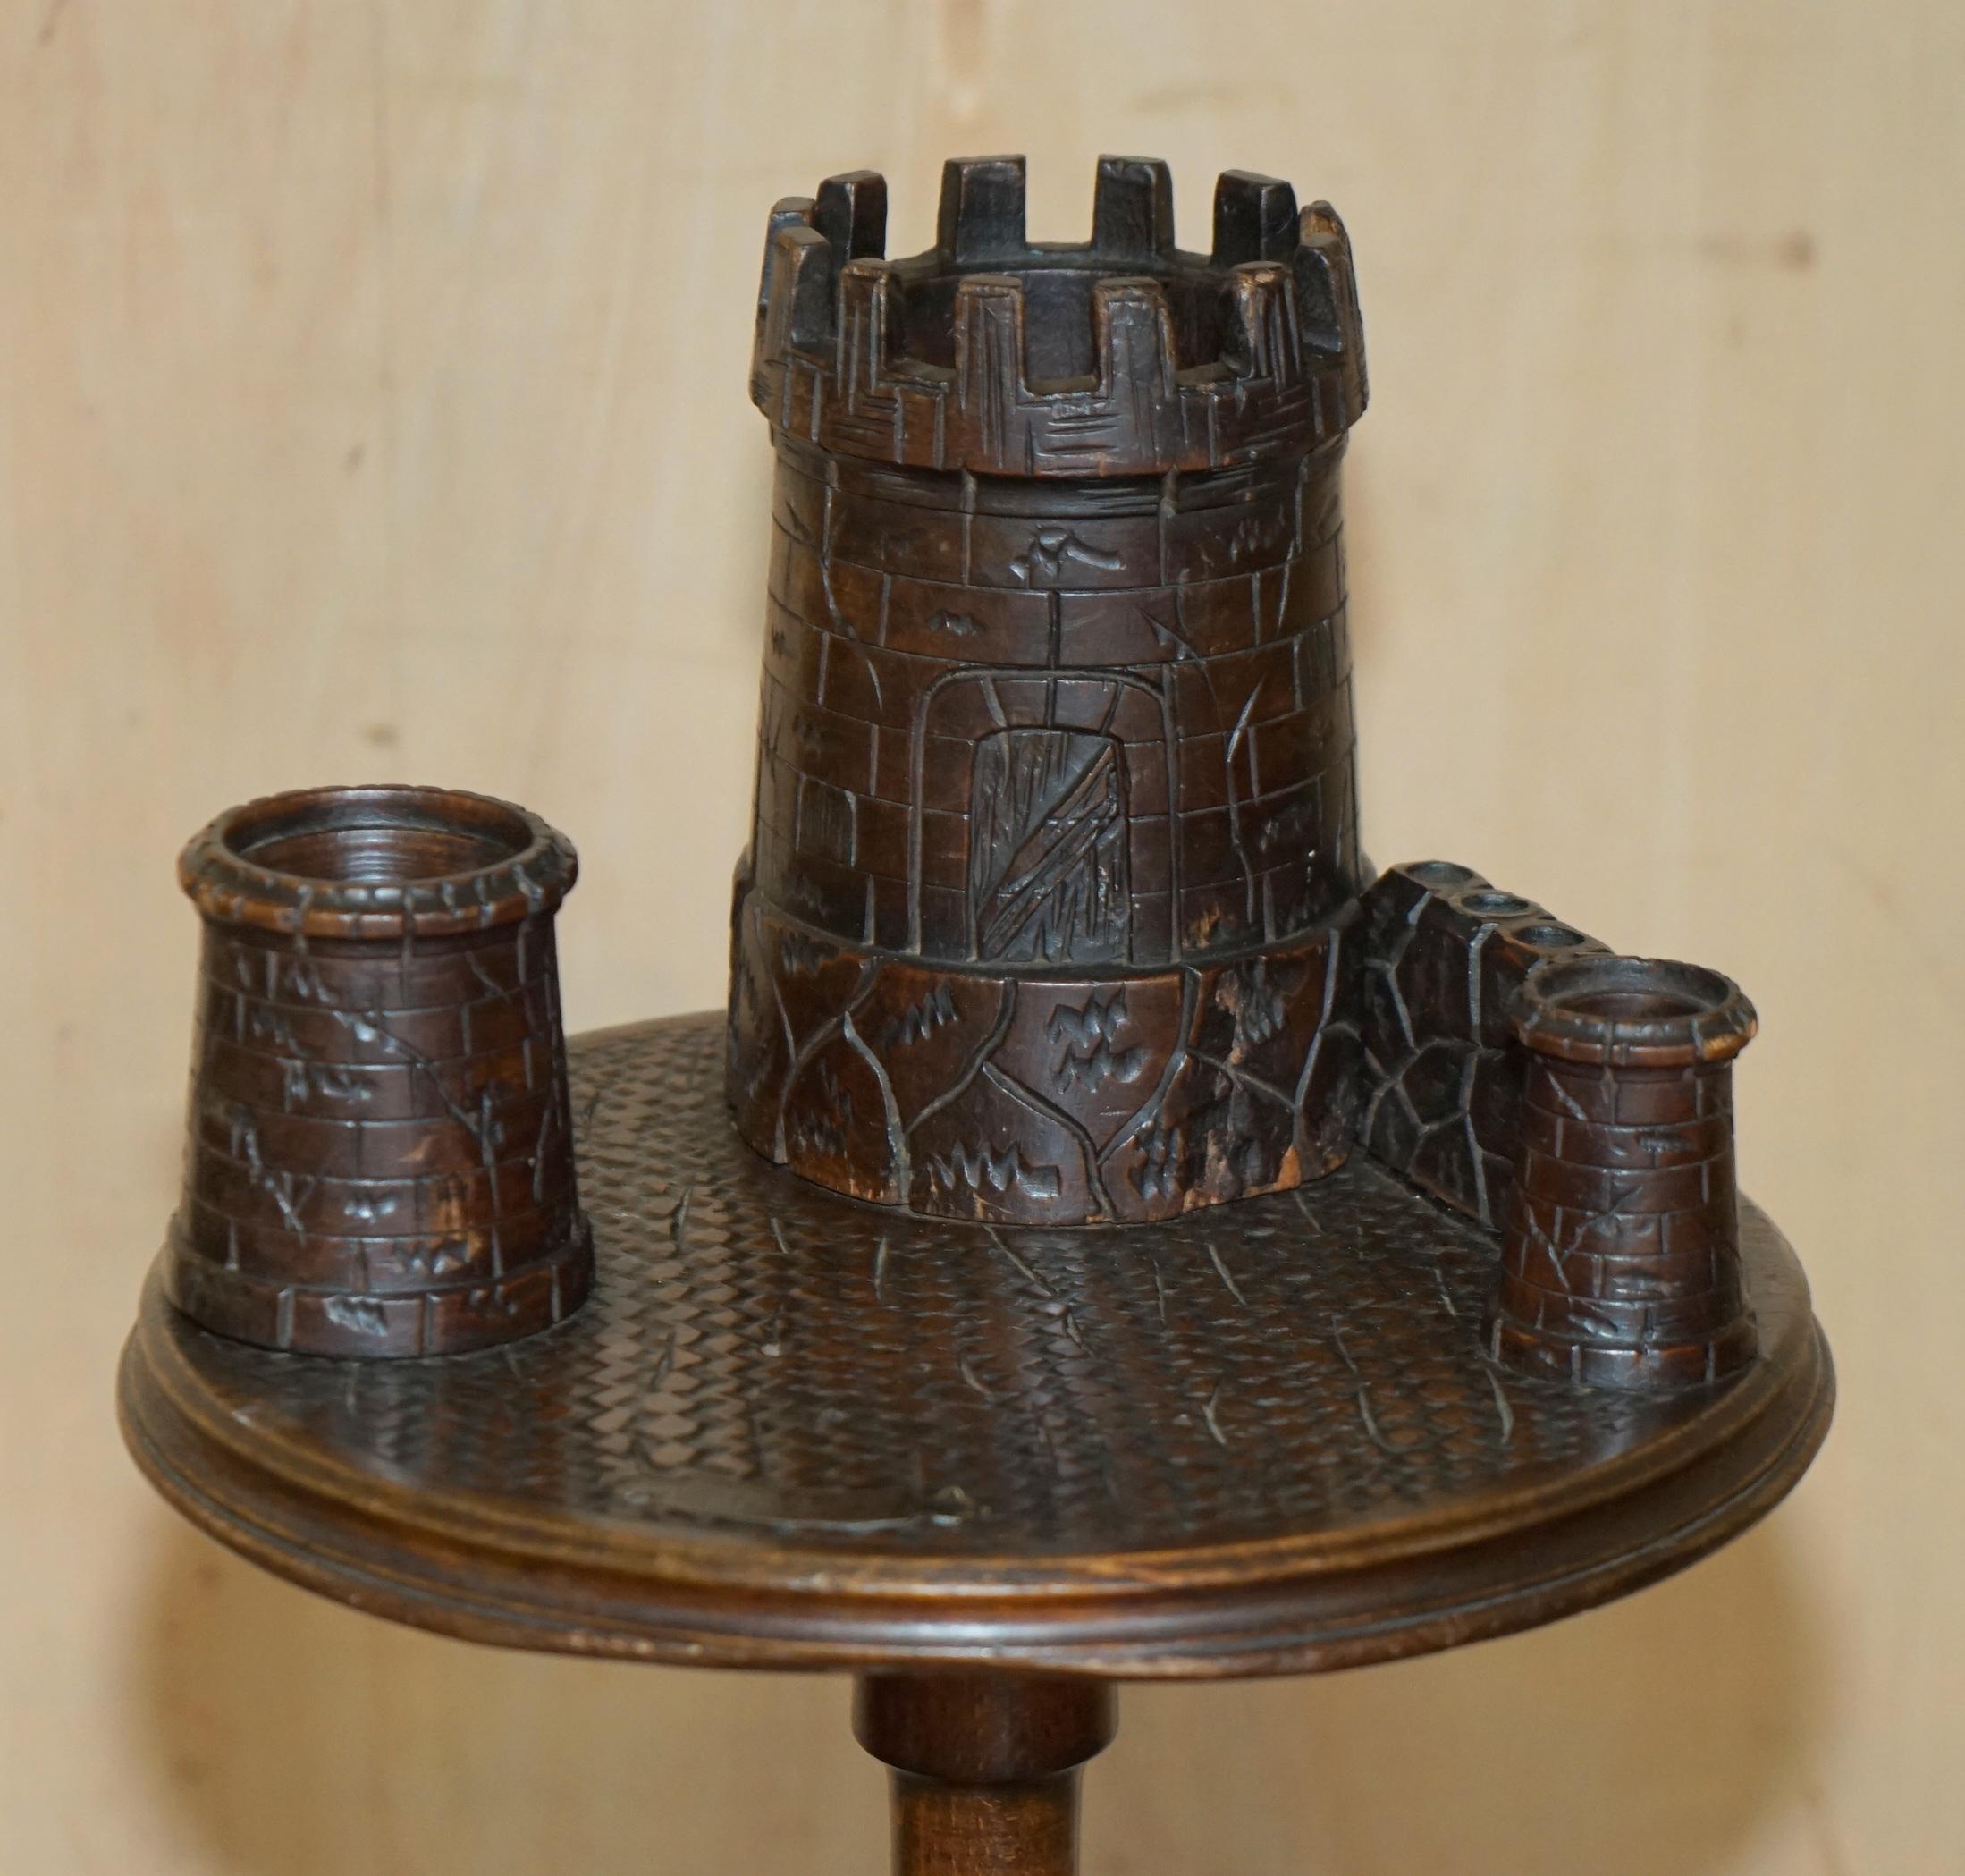 Late Victorian ANTIQUE ViCTORIAN SMOKERS SIDE TABLE DEPICTING CASTLES FOR PIPES TOBACCO CIGARS For Sale